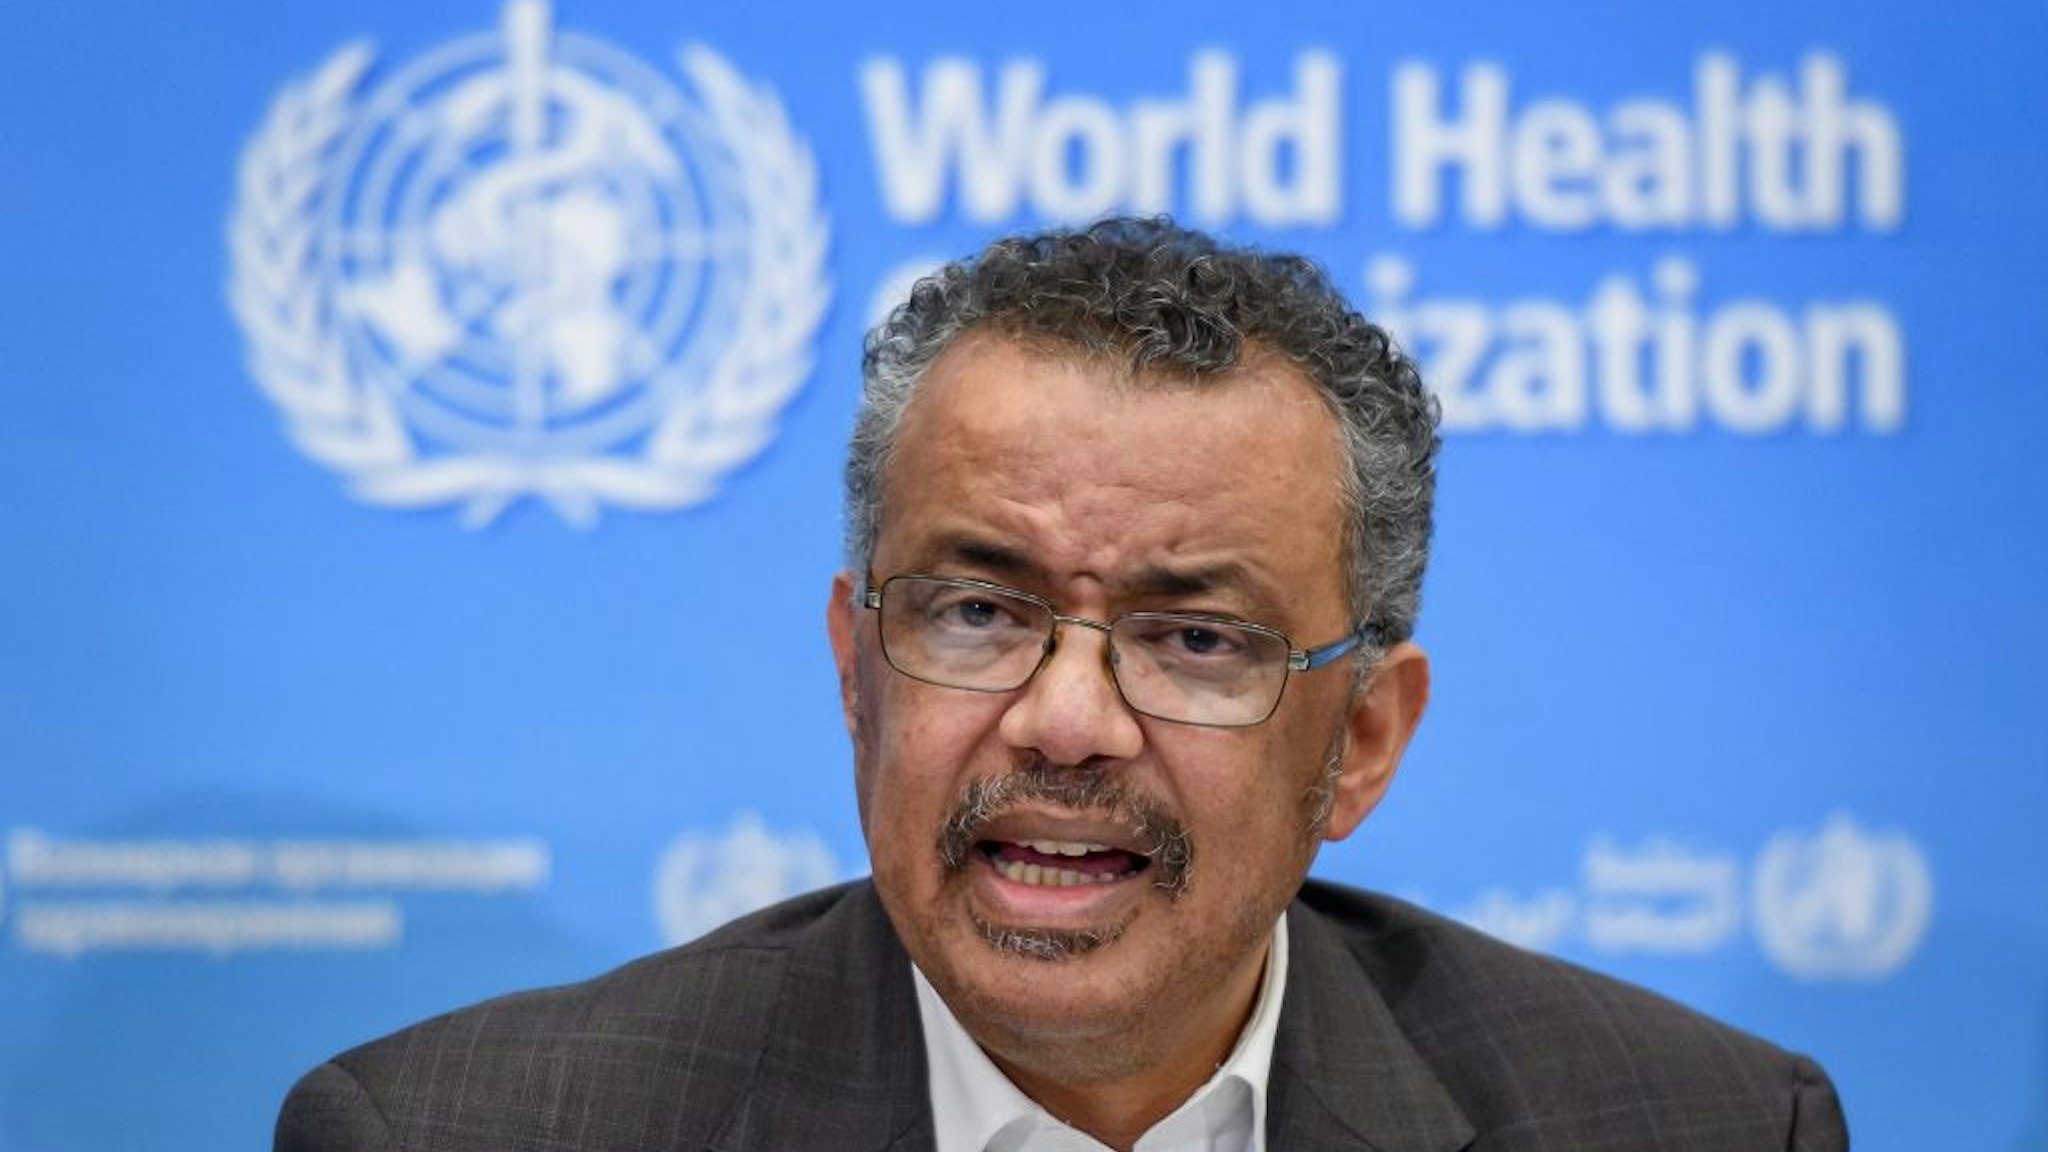 World Health Organization (WHO) Director-General Tedros Adhanom Ghebreyesus speaks during a press conference following a WHO Emergency committee to discuss whether the Coronavirus, the SARS-like virus, outbreak that began in China constitutes an international health emergency, on January 30, 2020 in Geneva. - The UN health agency declared an international emergency over the deadly coronavirus from China -- a rarely used designation that could lead to improved international co-ordination in tackling the disease.